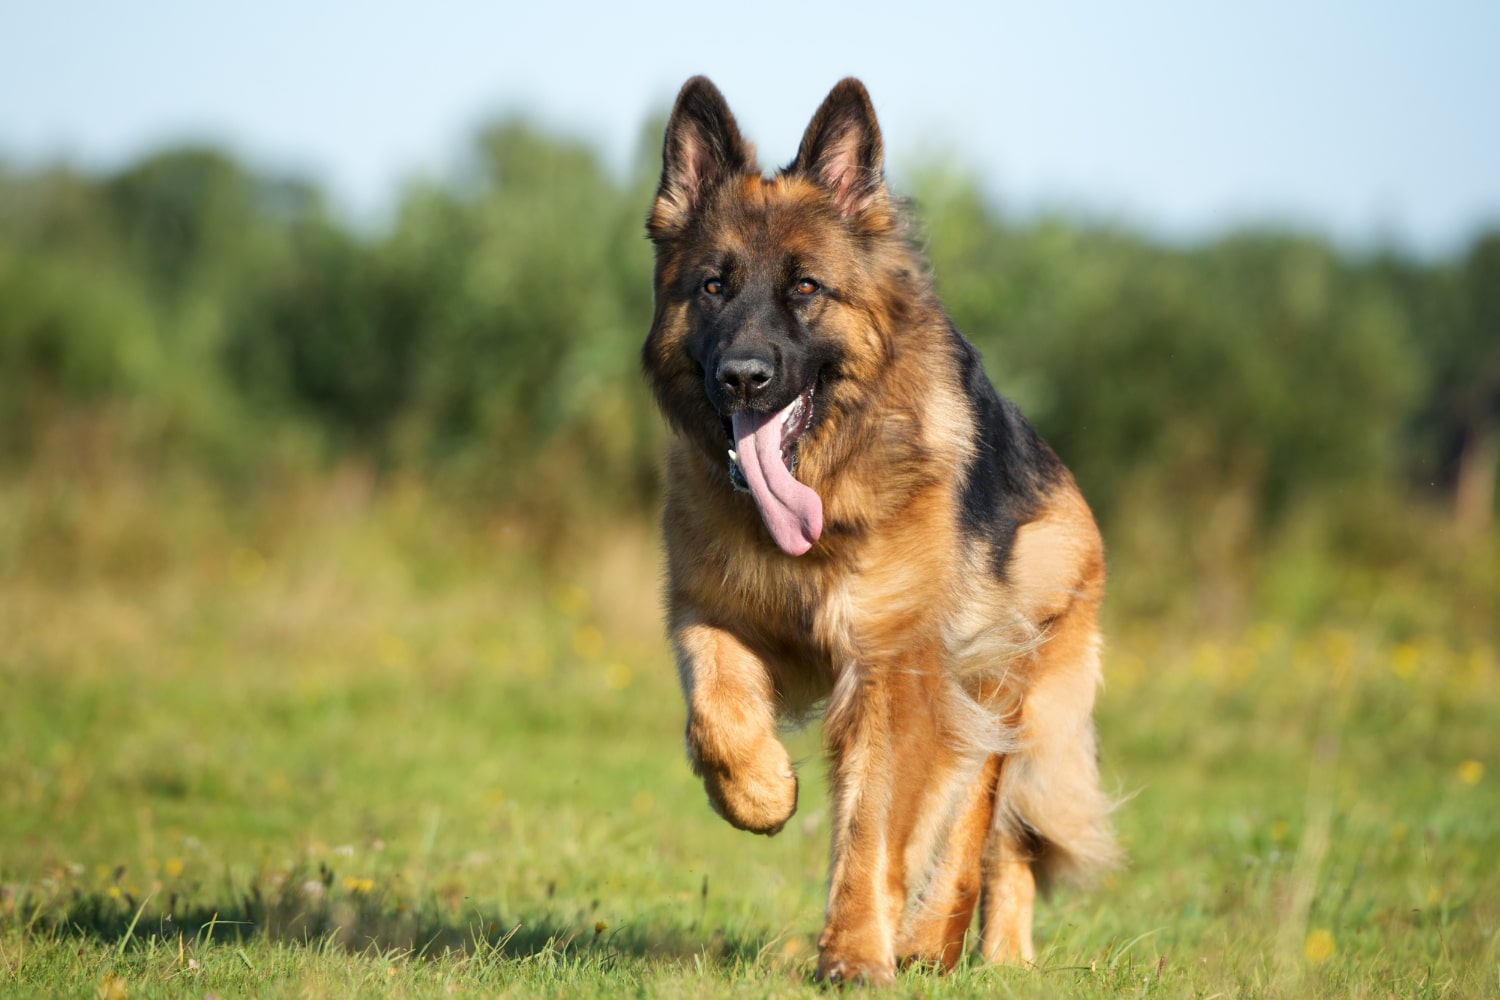 Mabel-the-German-Shepherd.jpg 22 March 2021 1 MB 1500 by 1000 pixels Edit Image Delete permanently Alt Text Describe the purpose of the image(opens in a new tab). Leave empty if the image is purely decorative.Title Mabel the German Shepherd Caption